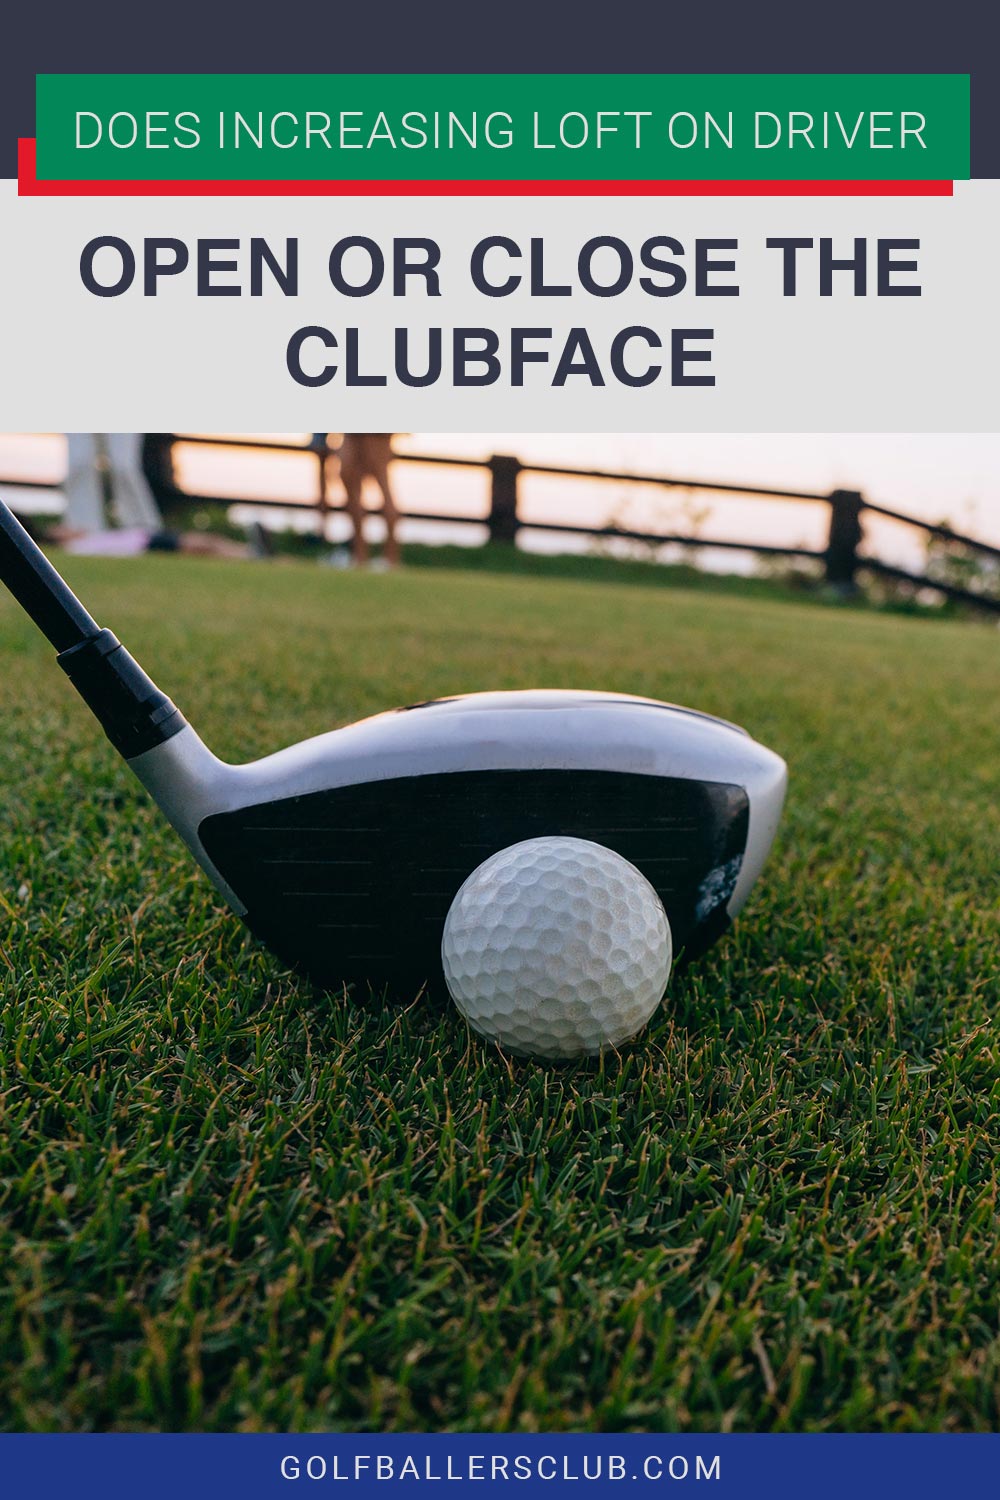 A golf club hitting a golf ball - Does increasing loft on driver open or close the clubface